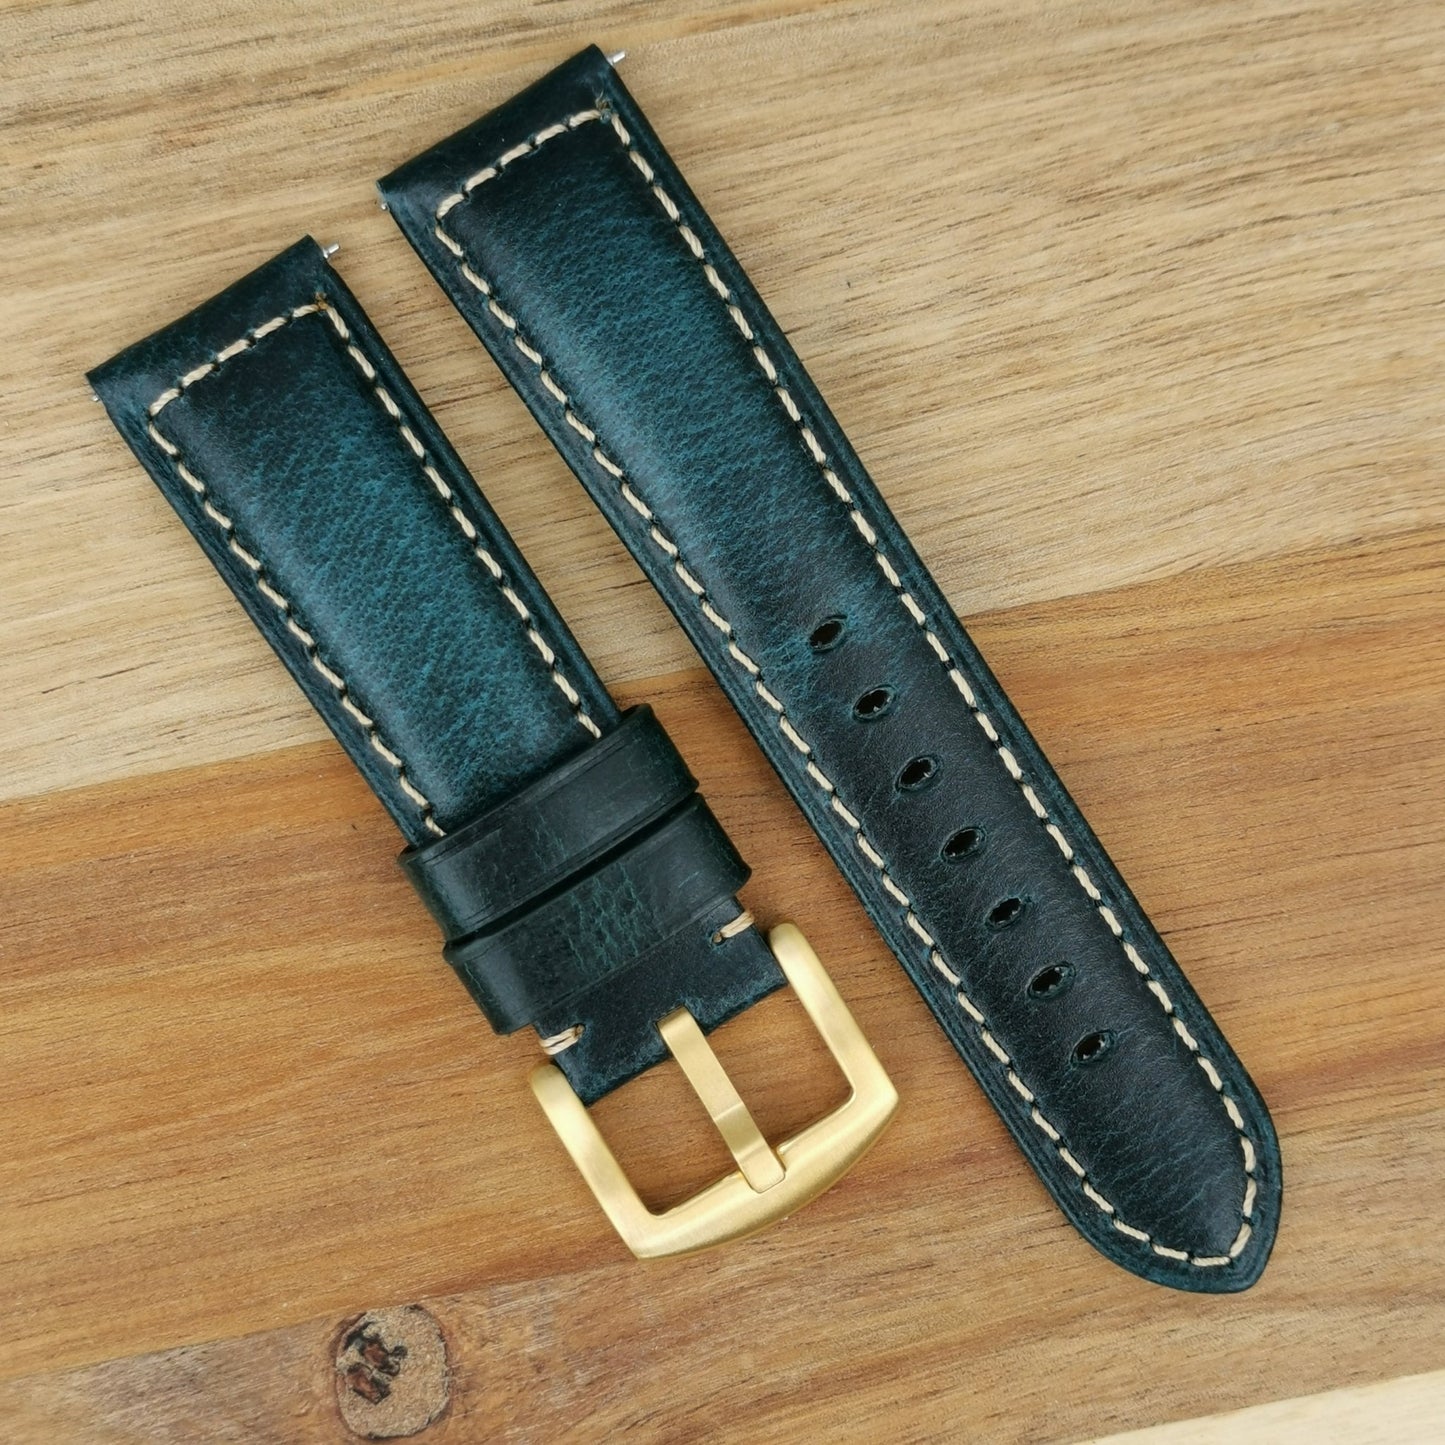 Berlin blue full grain leather watch strap with brushed gold 316L stainless steel buckle.